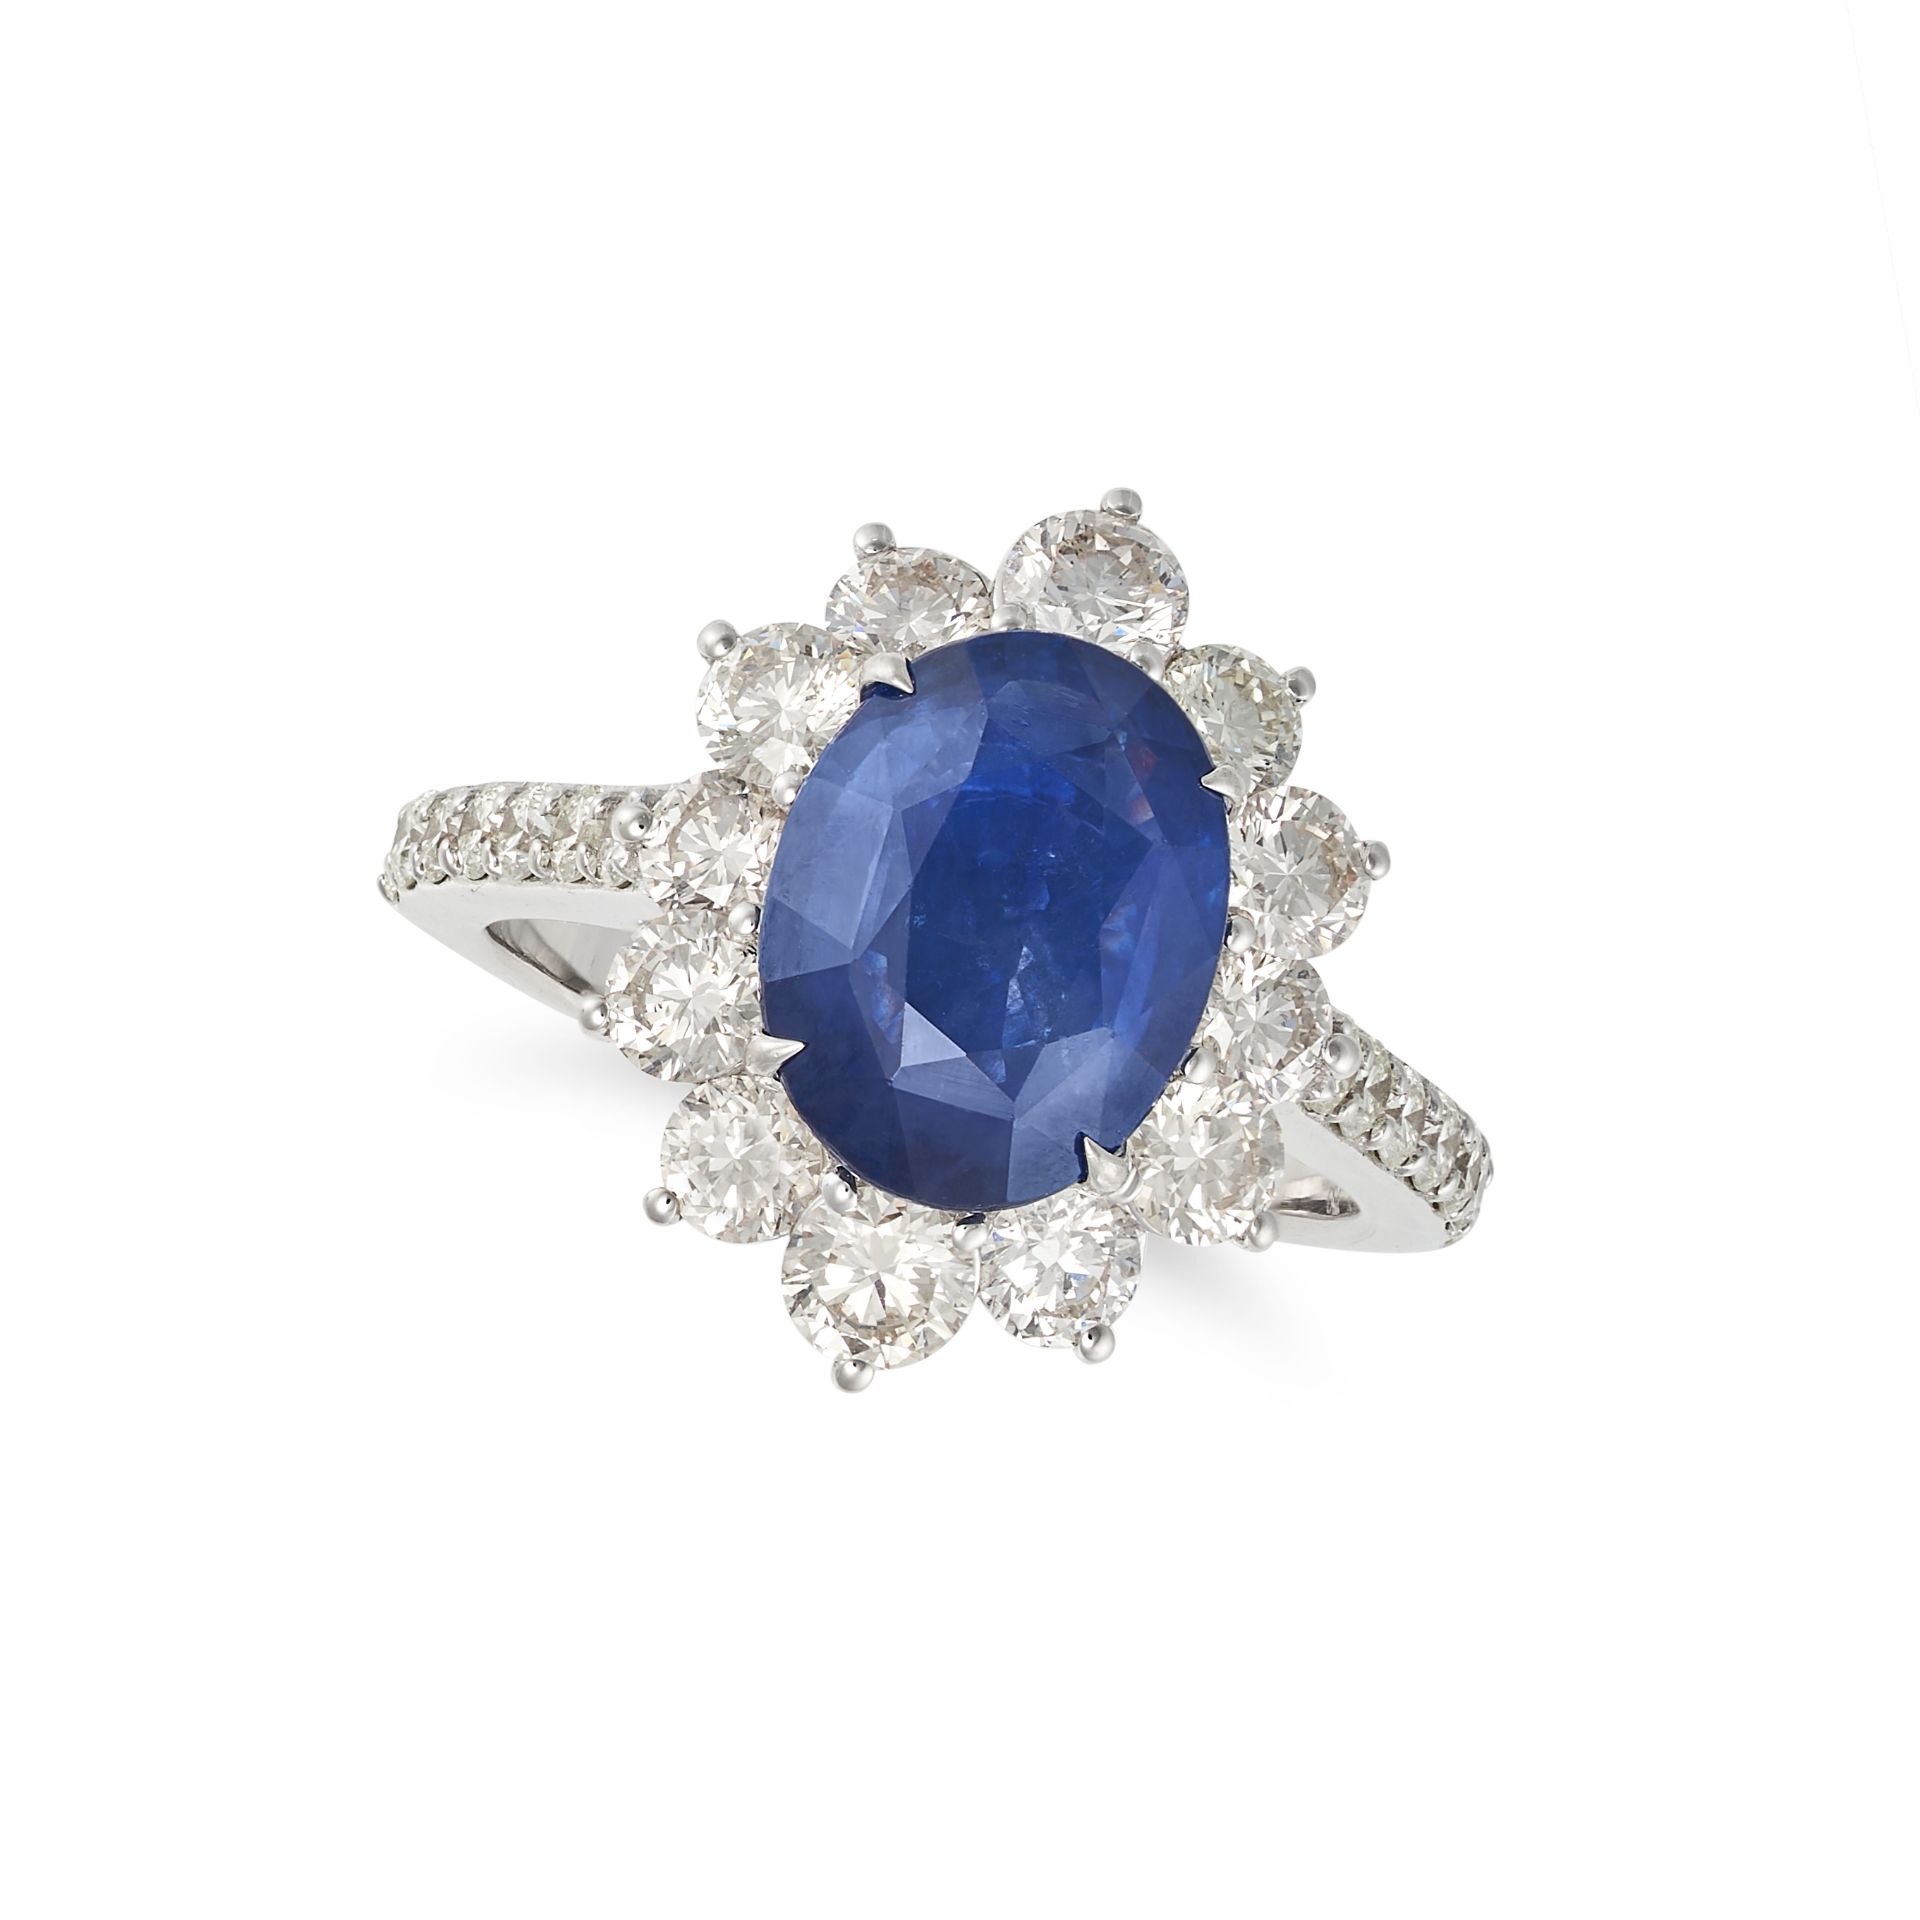 A SAPPHIRE AND DIAMOND CLUSTER RING in 18ct white gold, set with an oval cut sapphire of 4.19 car...